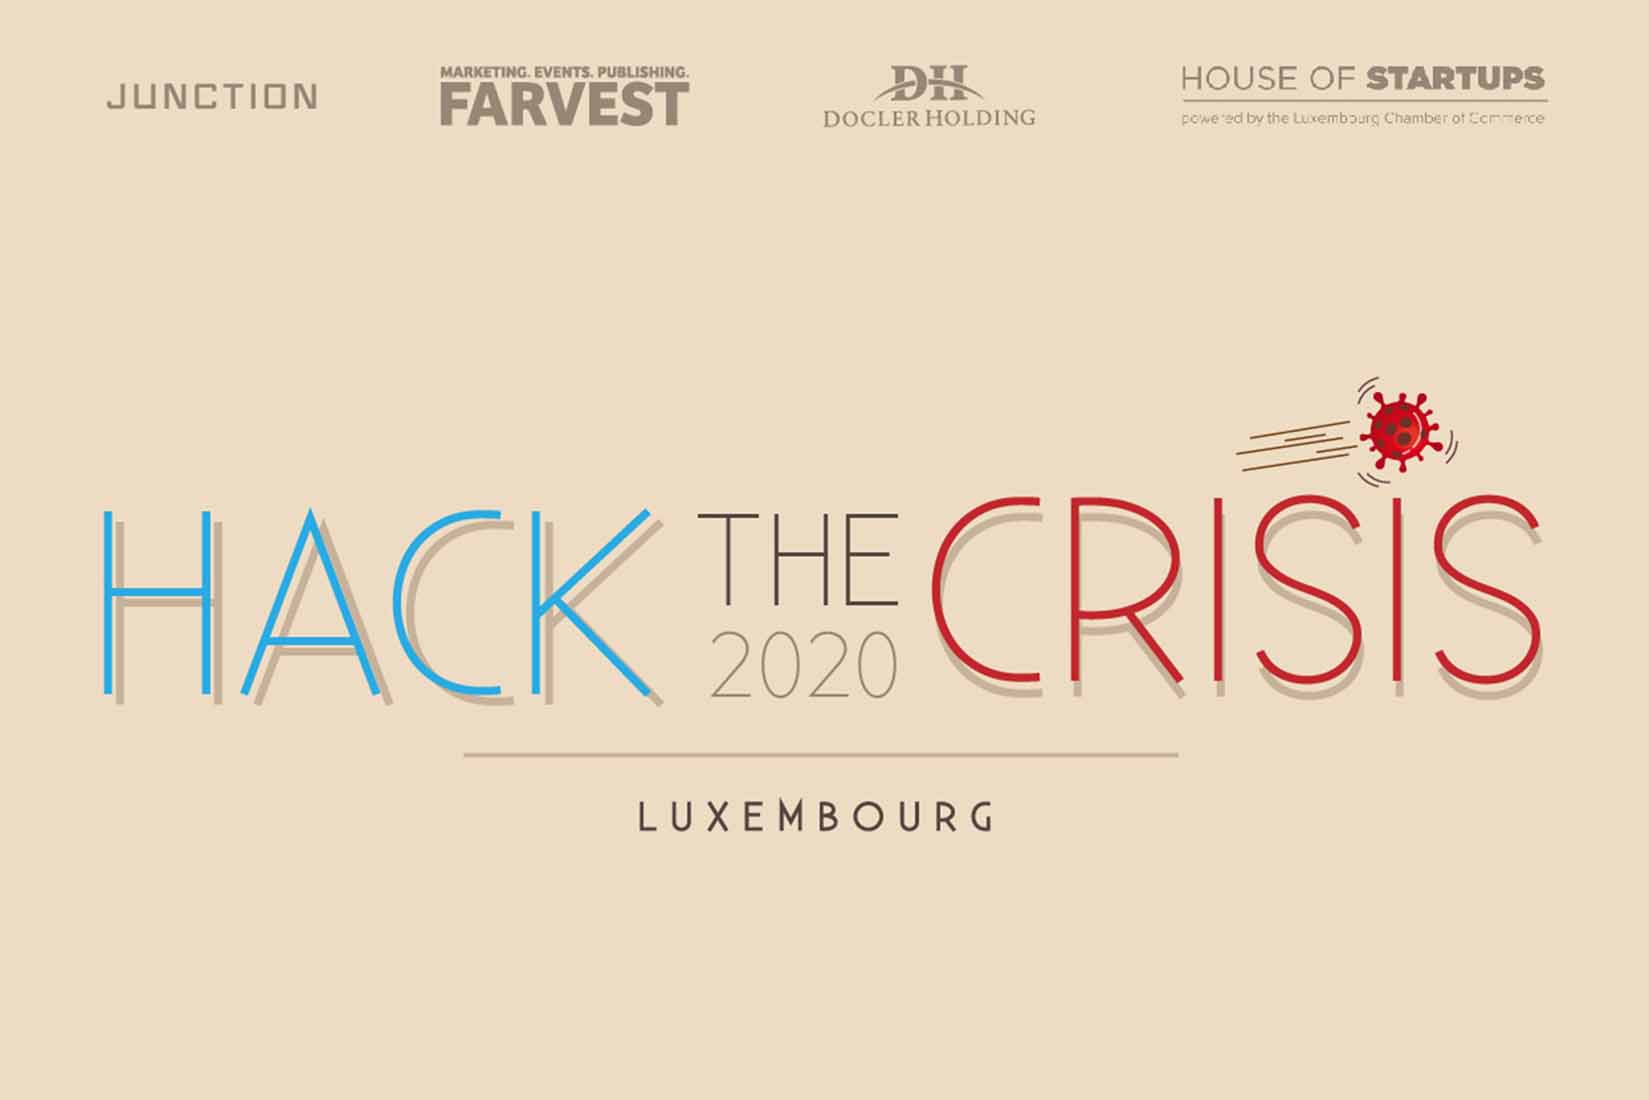 Hack the Crisis Luxembourg